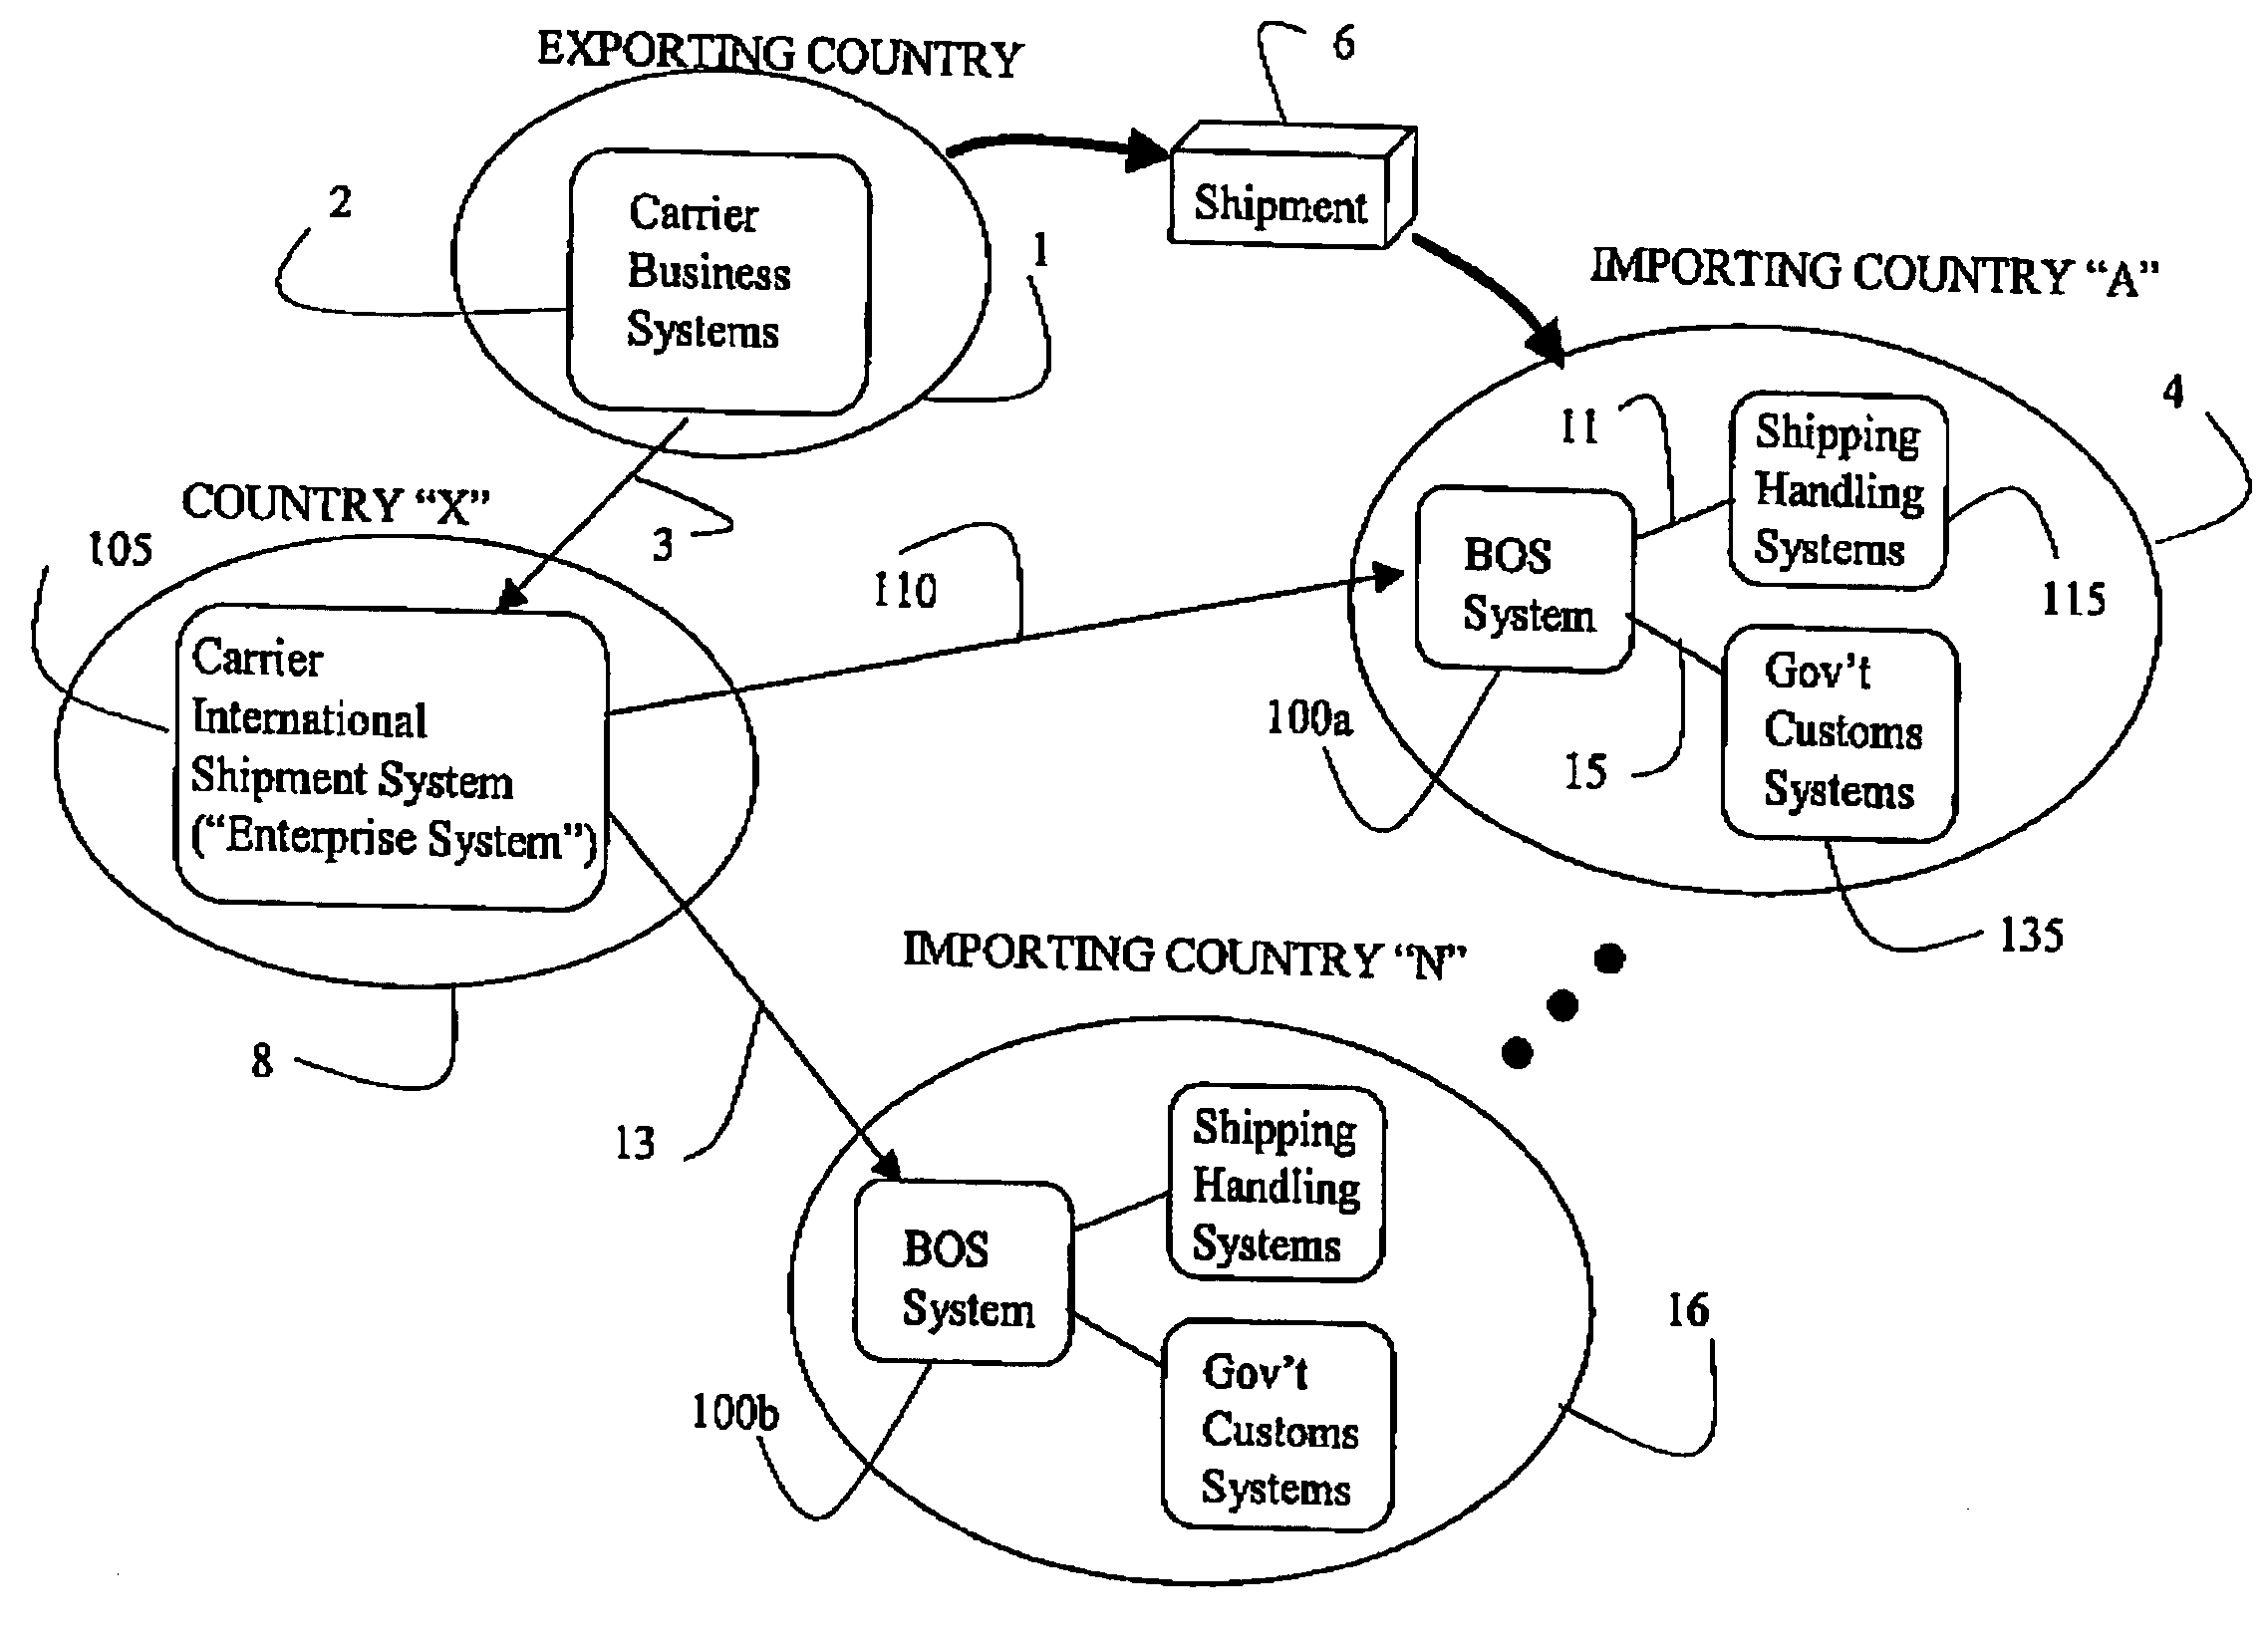 Systems and methods for international shipping and brokage operations support processing